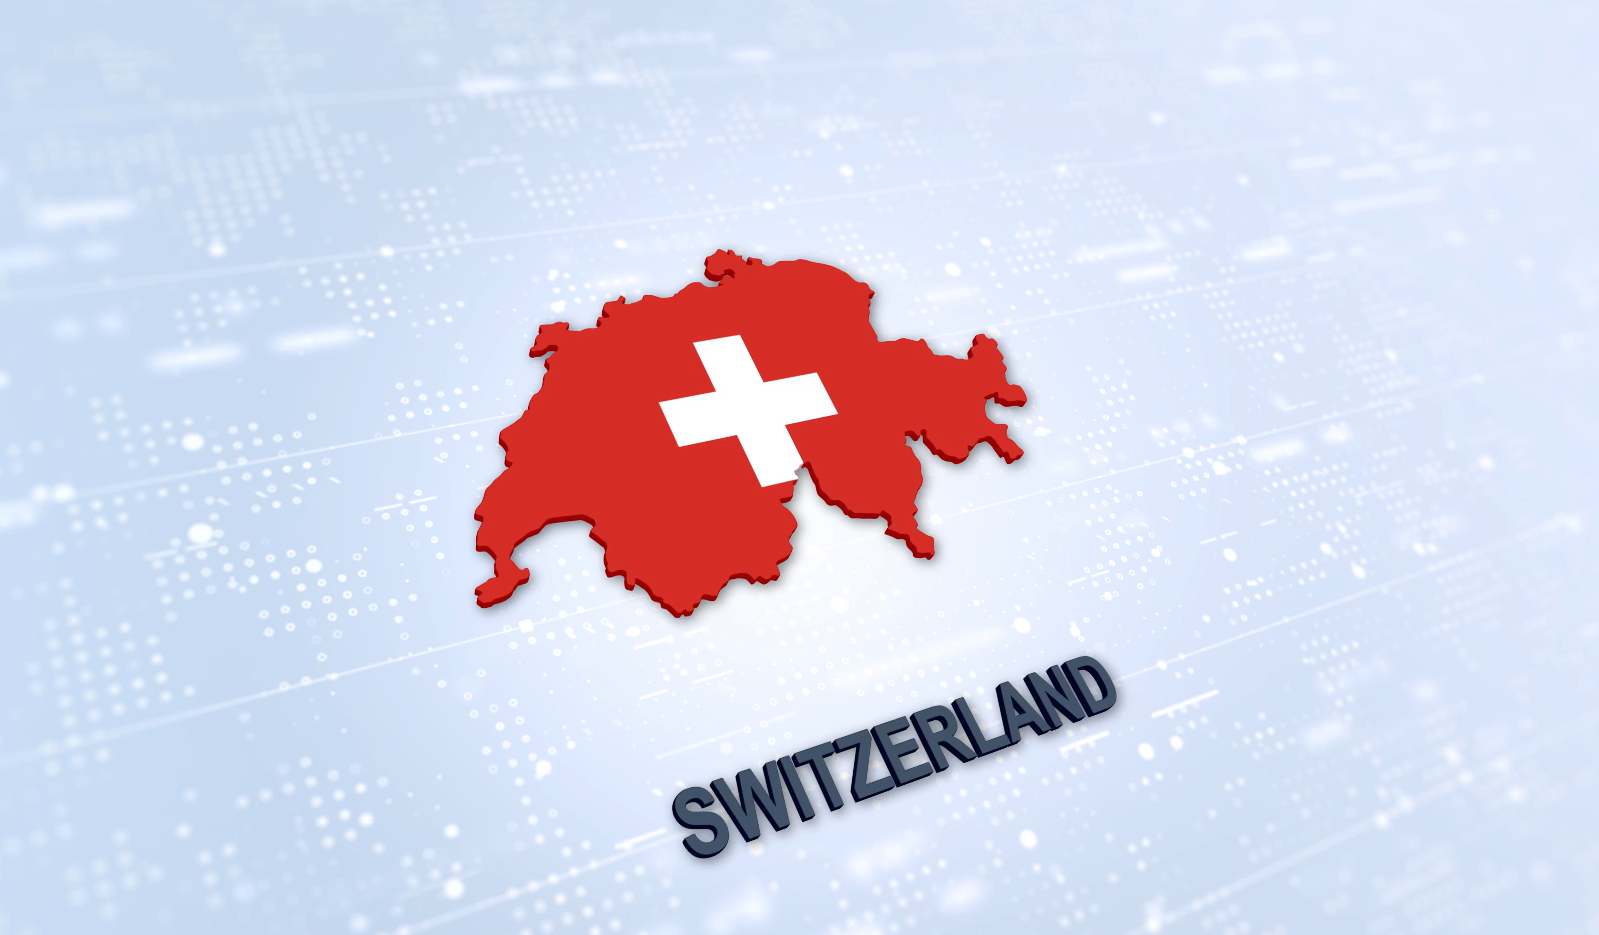 The Swiss subsidiary of MEDITOP Pharmaceuticals Ltd.